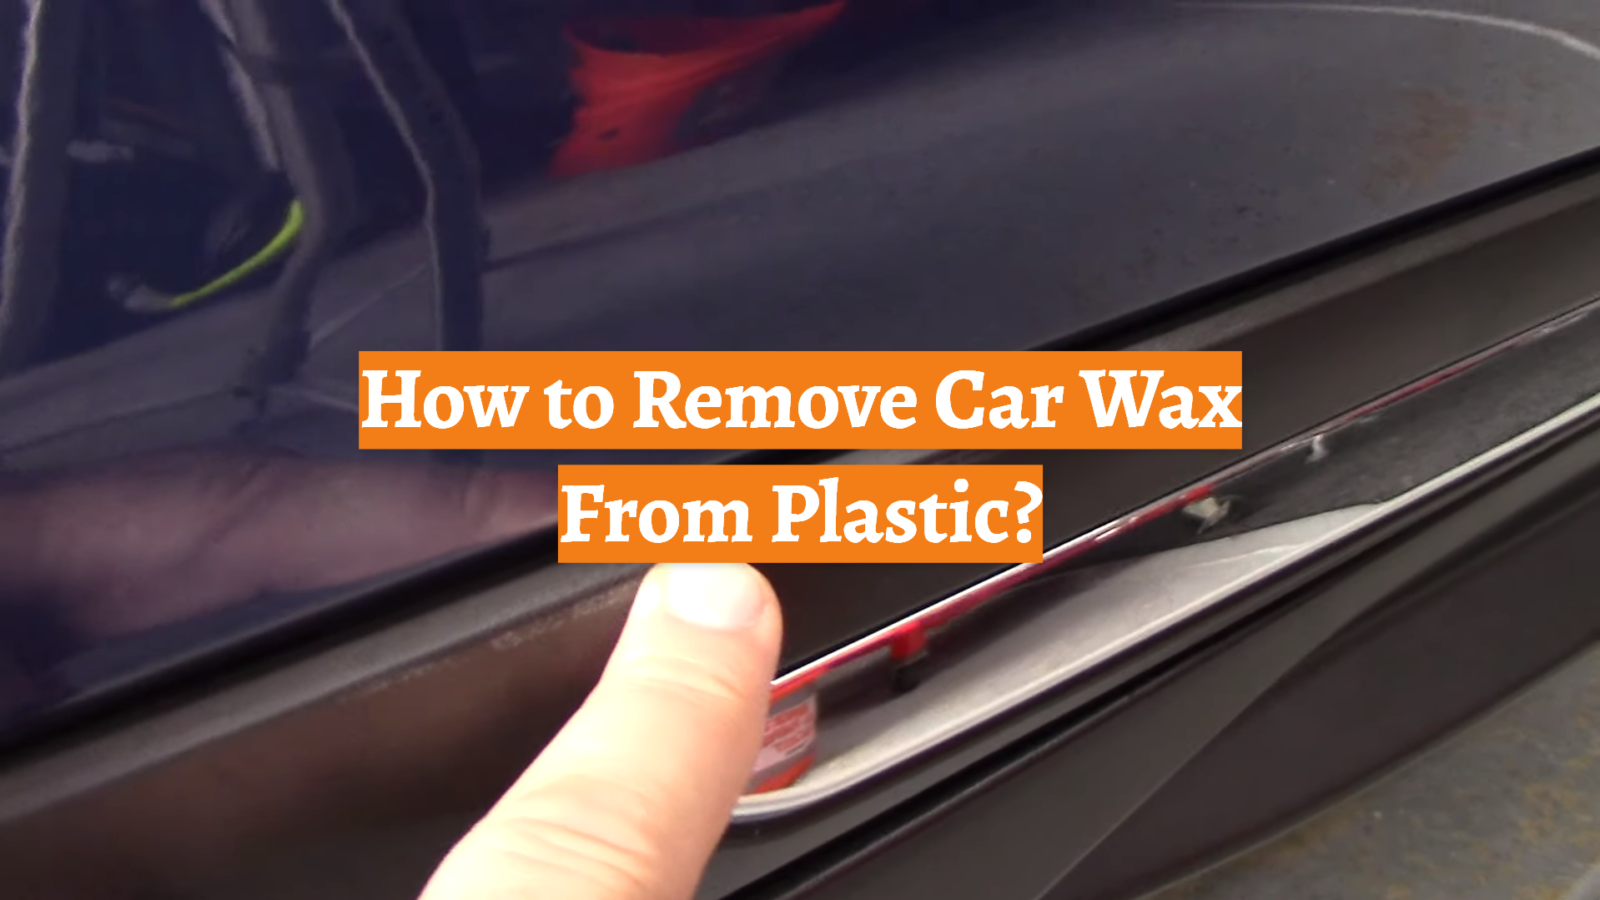 How to Remove Car Wax From Plastic?